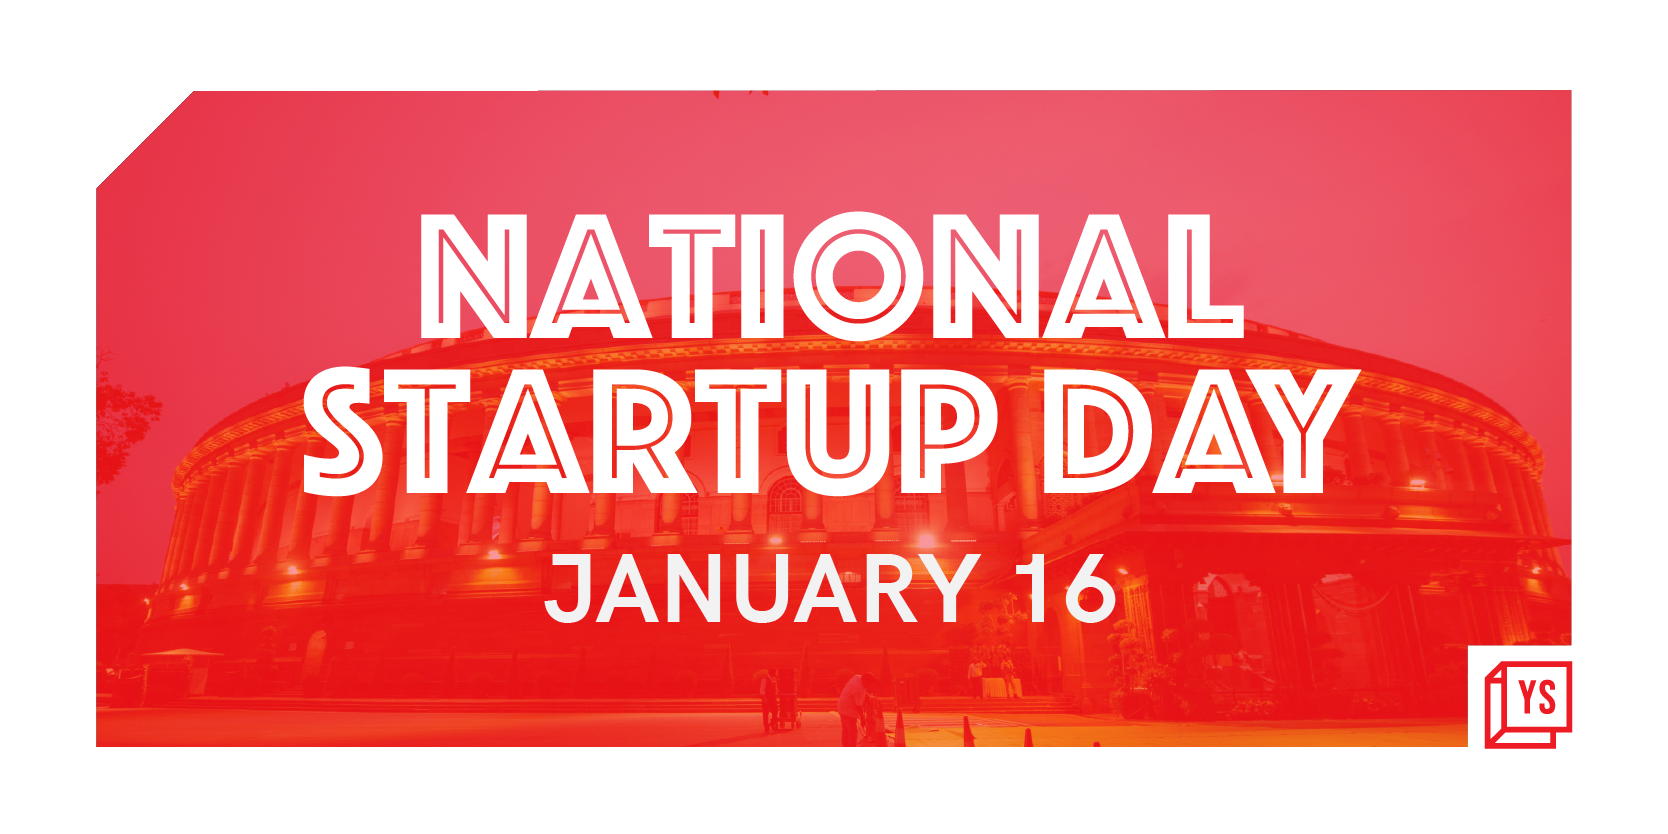 What National Startup Day means for startups 